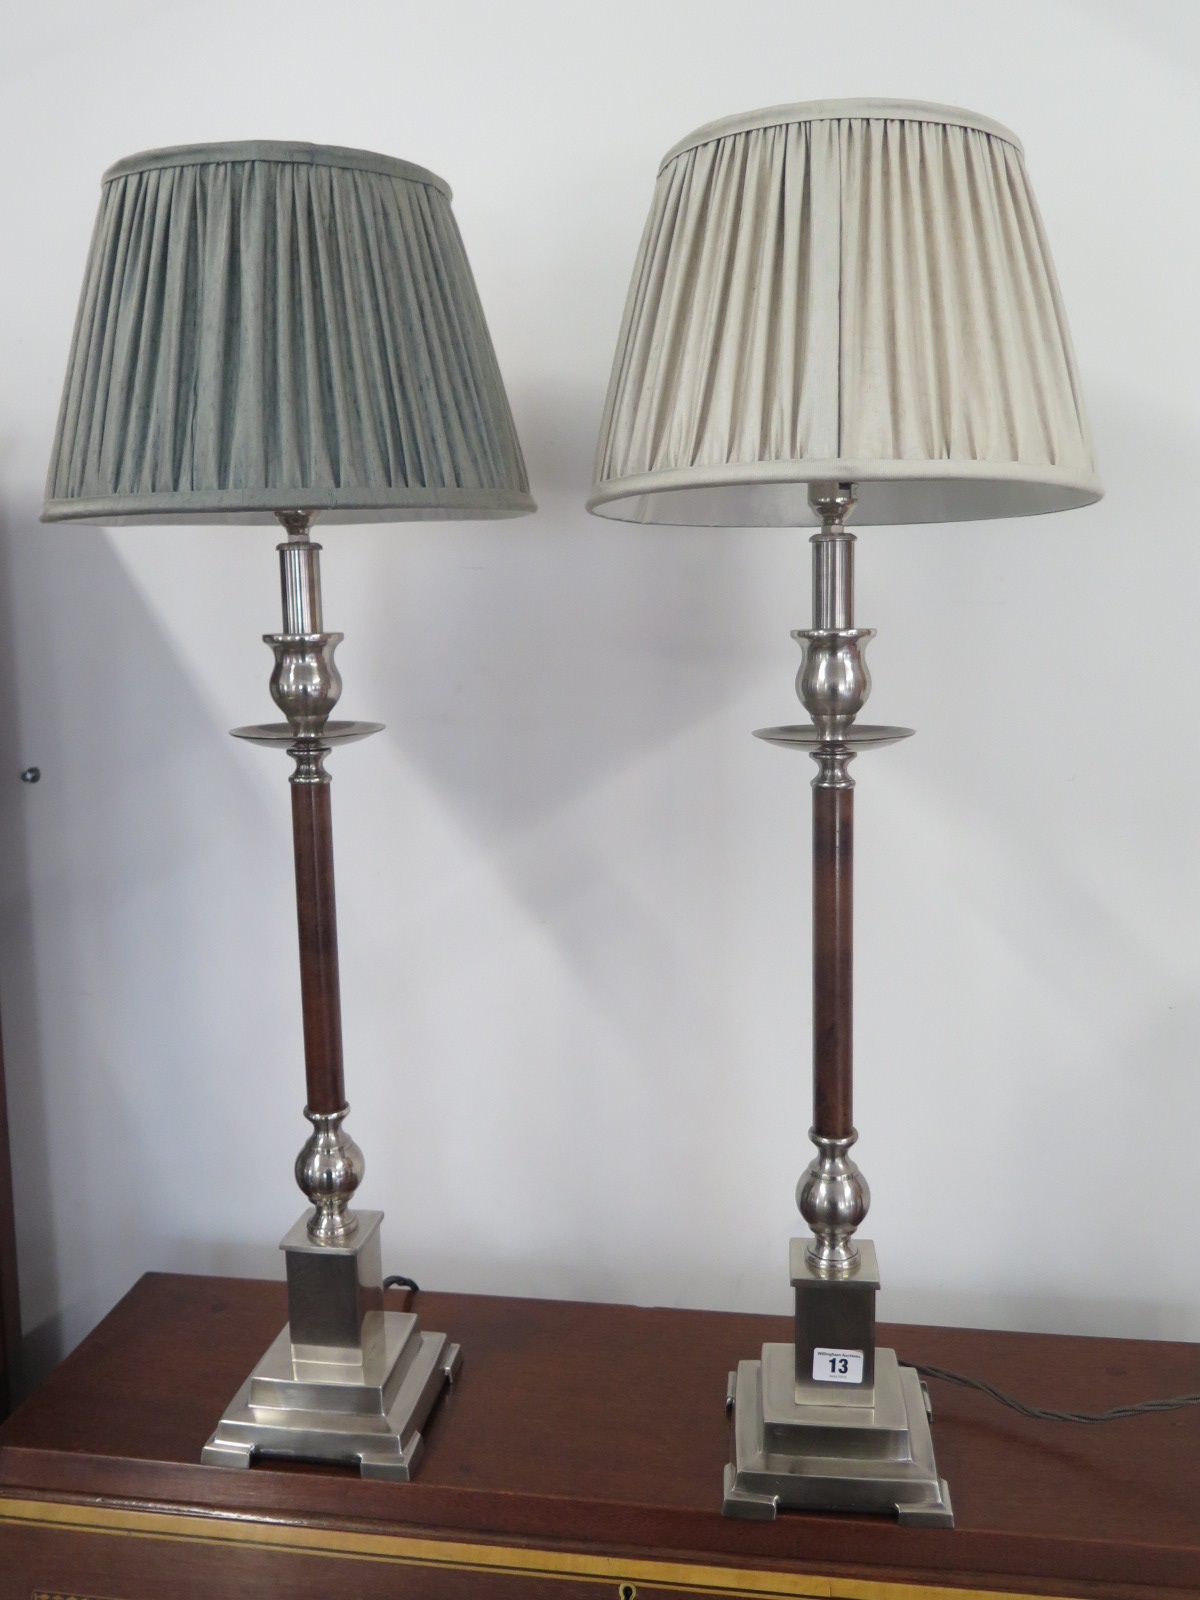 A pair of good quality table lamps, 80cm high, in good condition